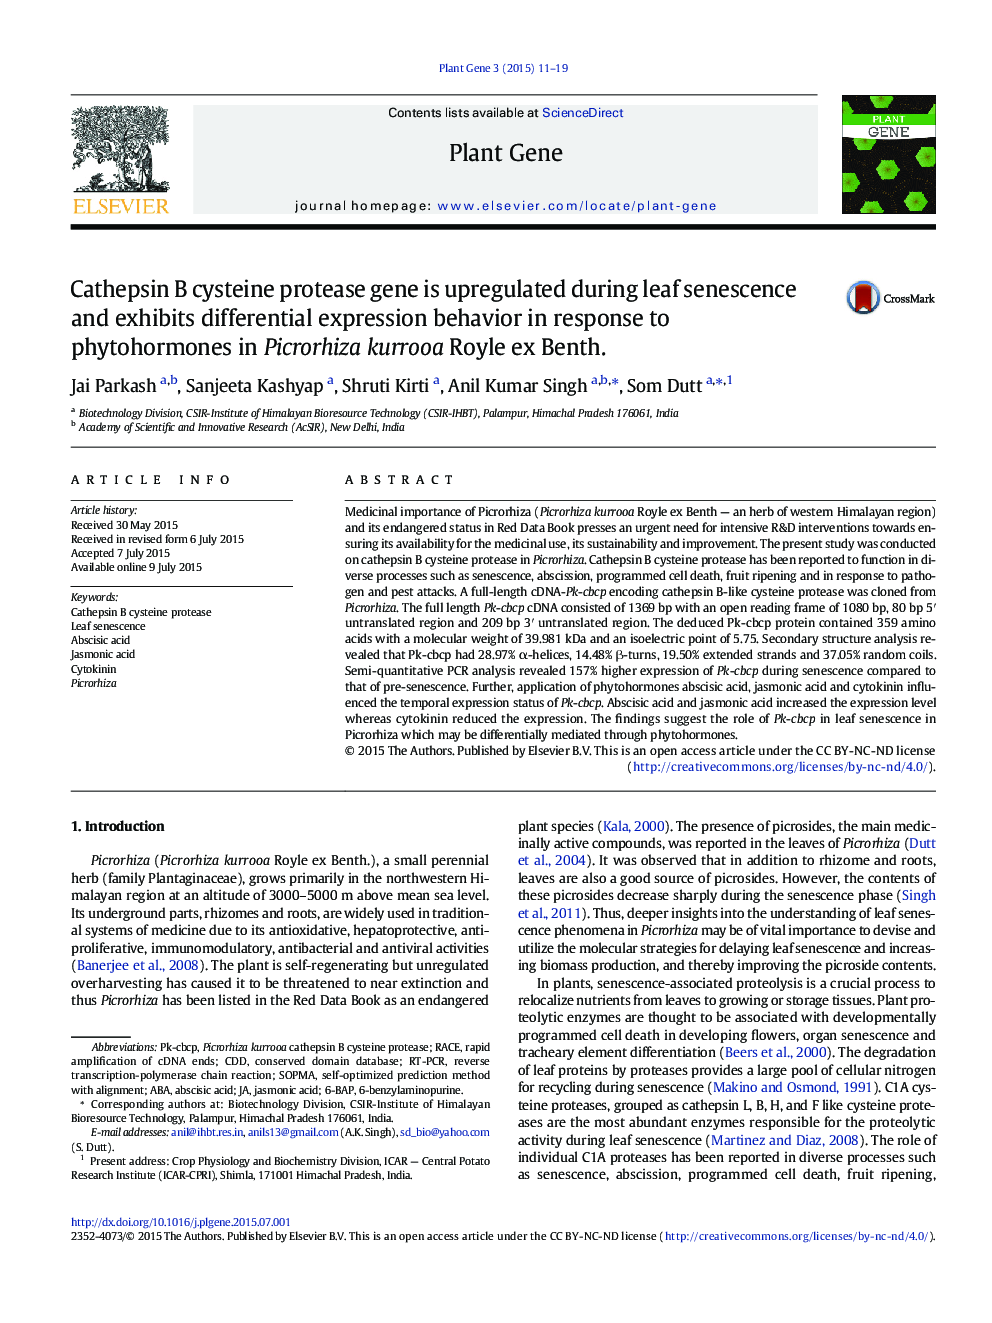 Cathepsin B cysteine protease gene is upregulated during leaf senescence and exhibits differential expression behavior in response to phytohormones in Picrorhiza kurrooa Royle ex Benth.